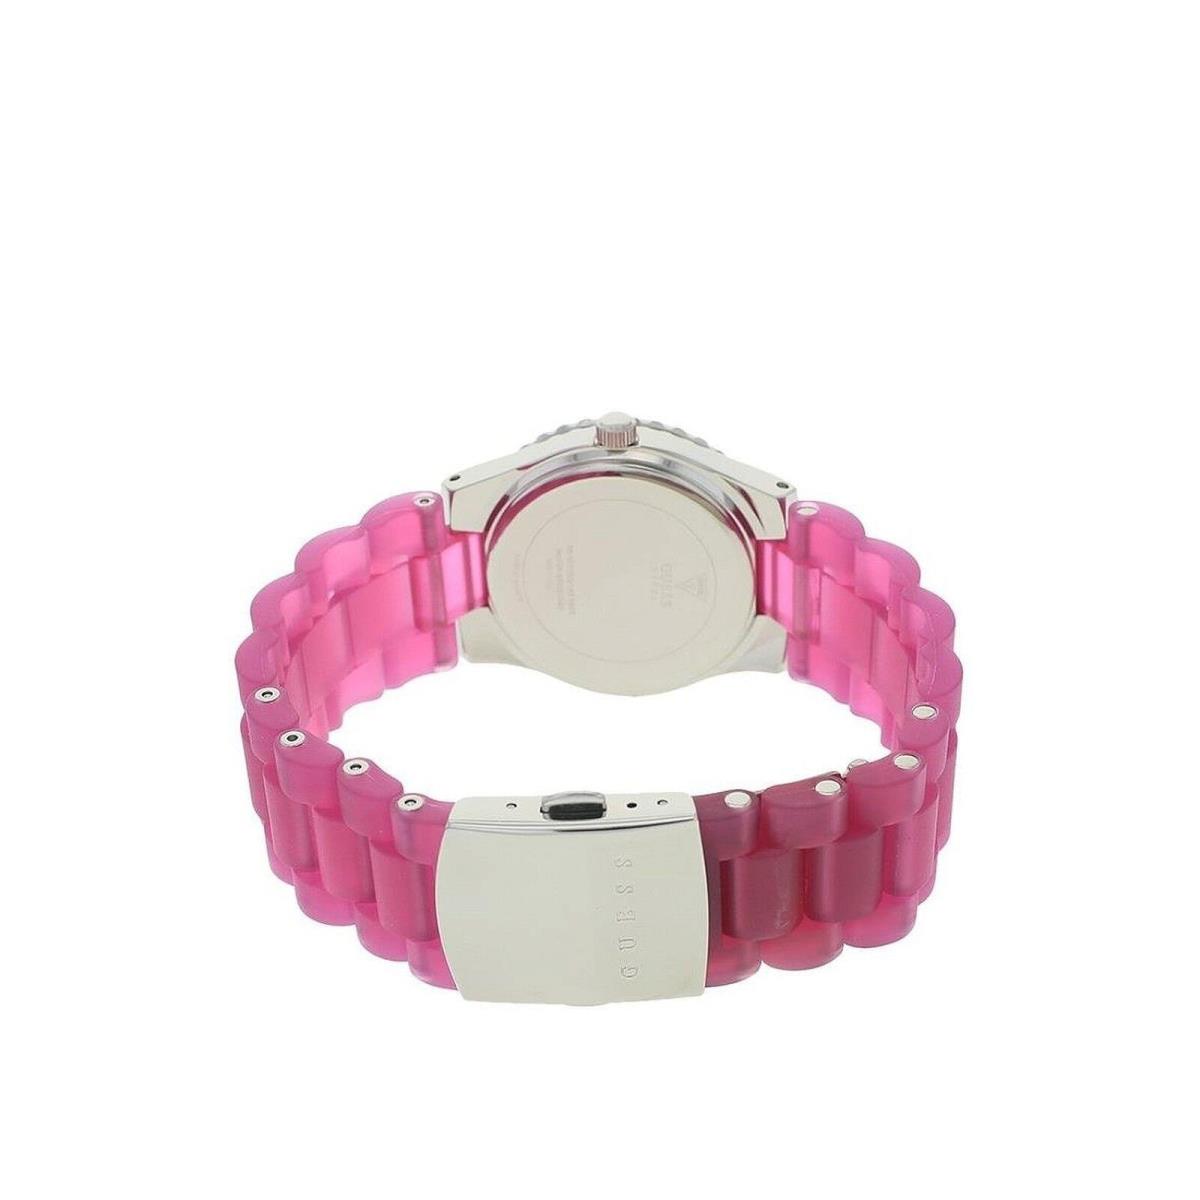 Guess W95087L1 Women`s Analog Watch White/silver Dial Pink Silicone Band WR - Dial: White, Band: Pink, Bezel: Silver